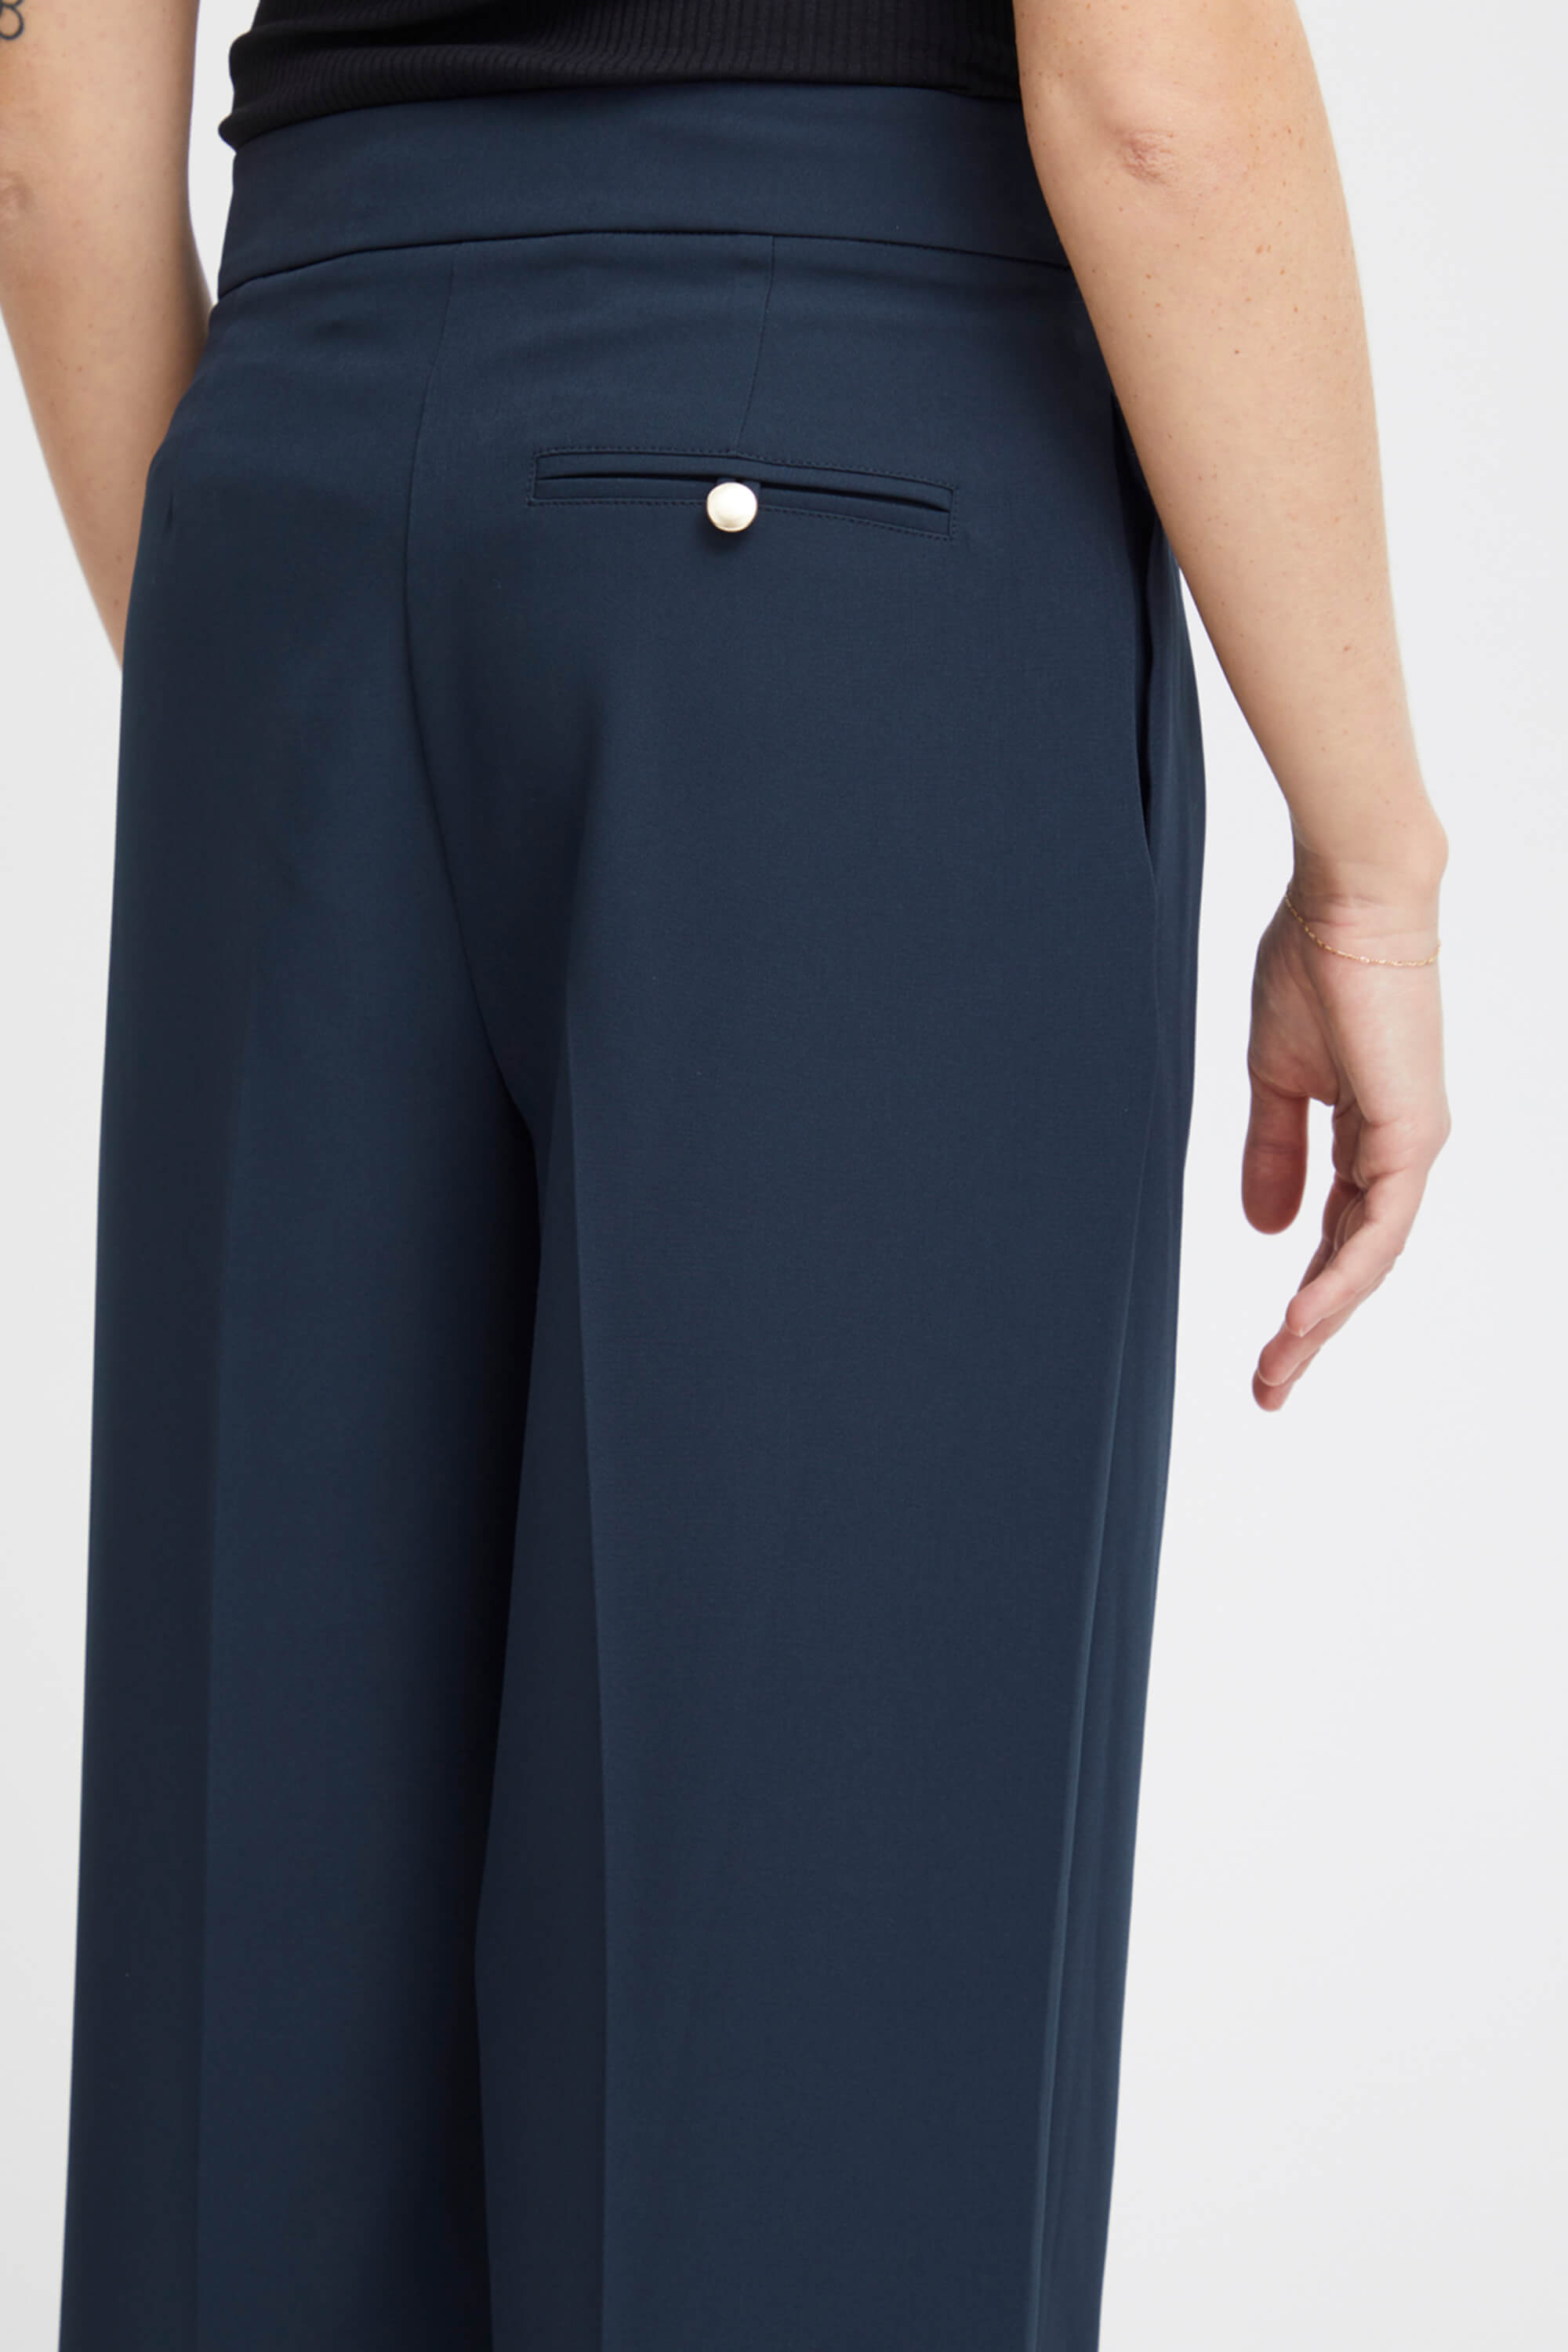 Ichi Lexi Trousers Total Eclipse